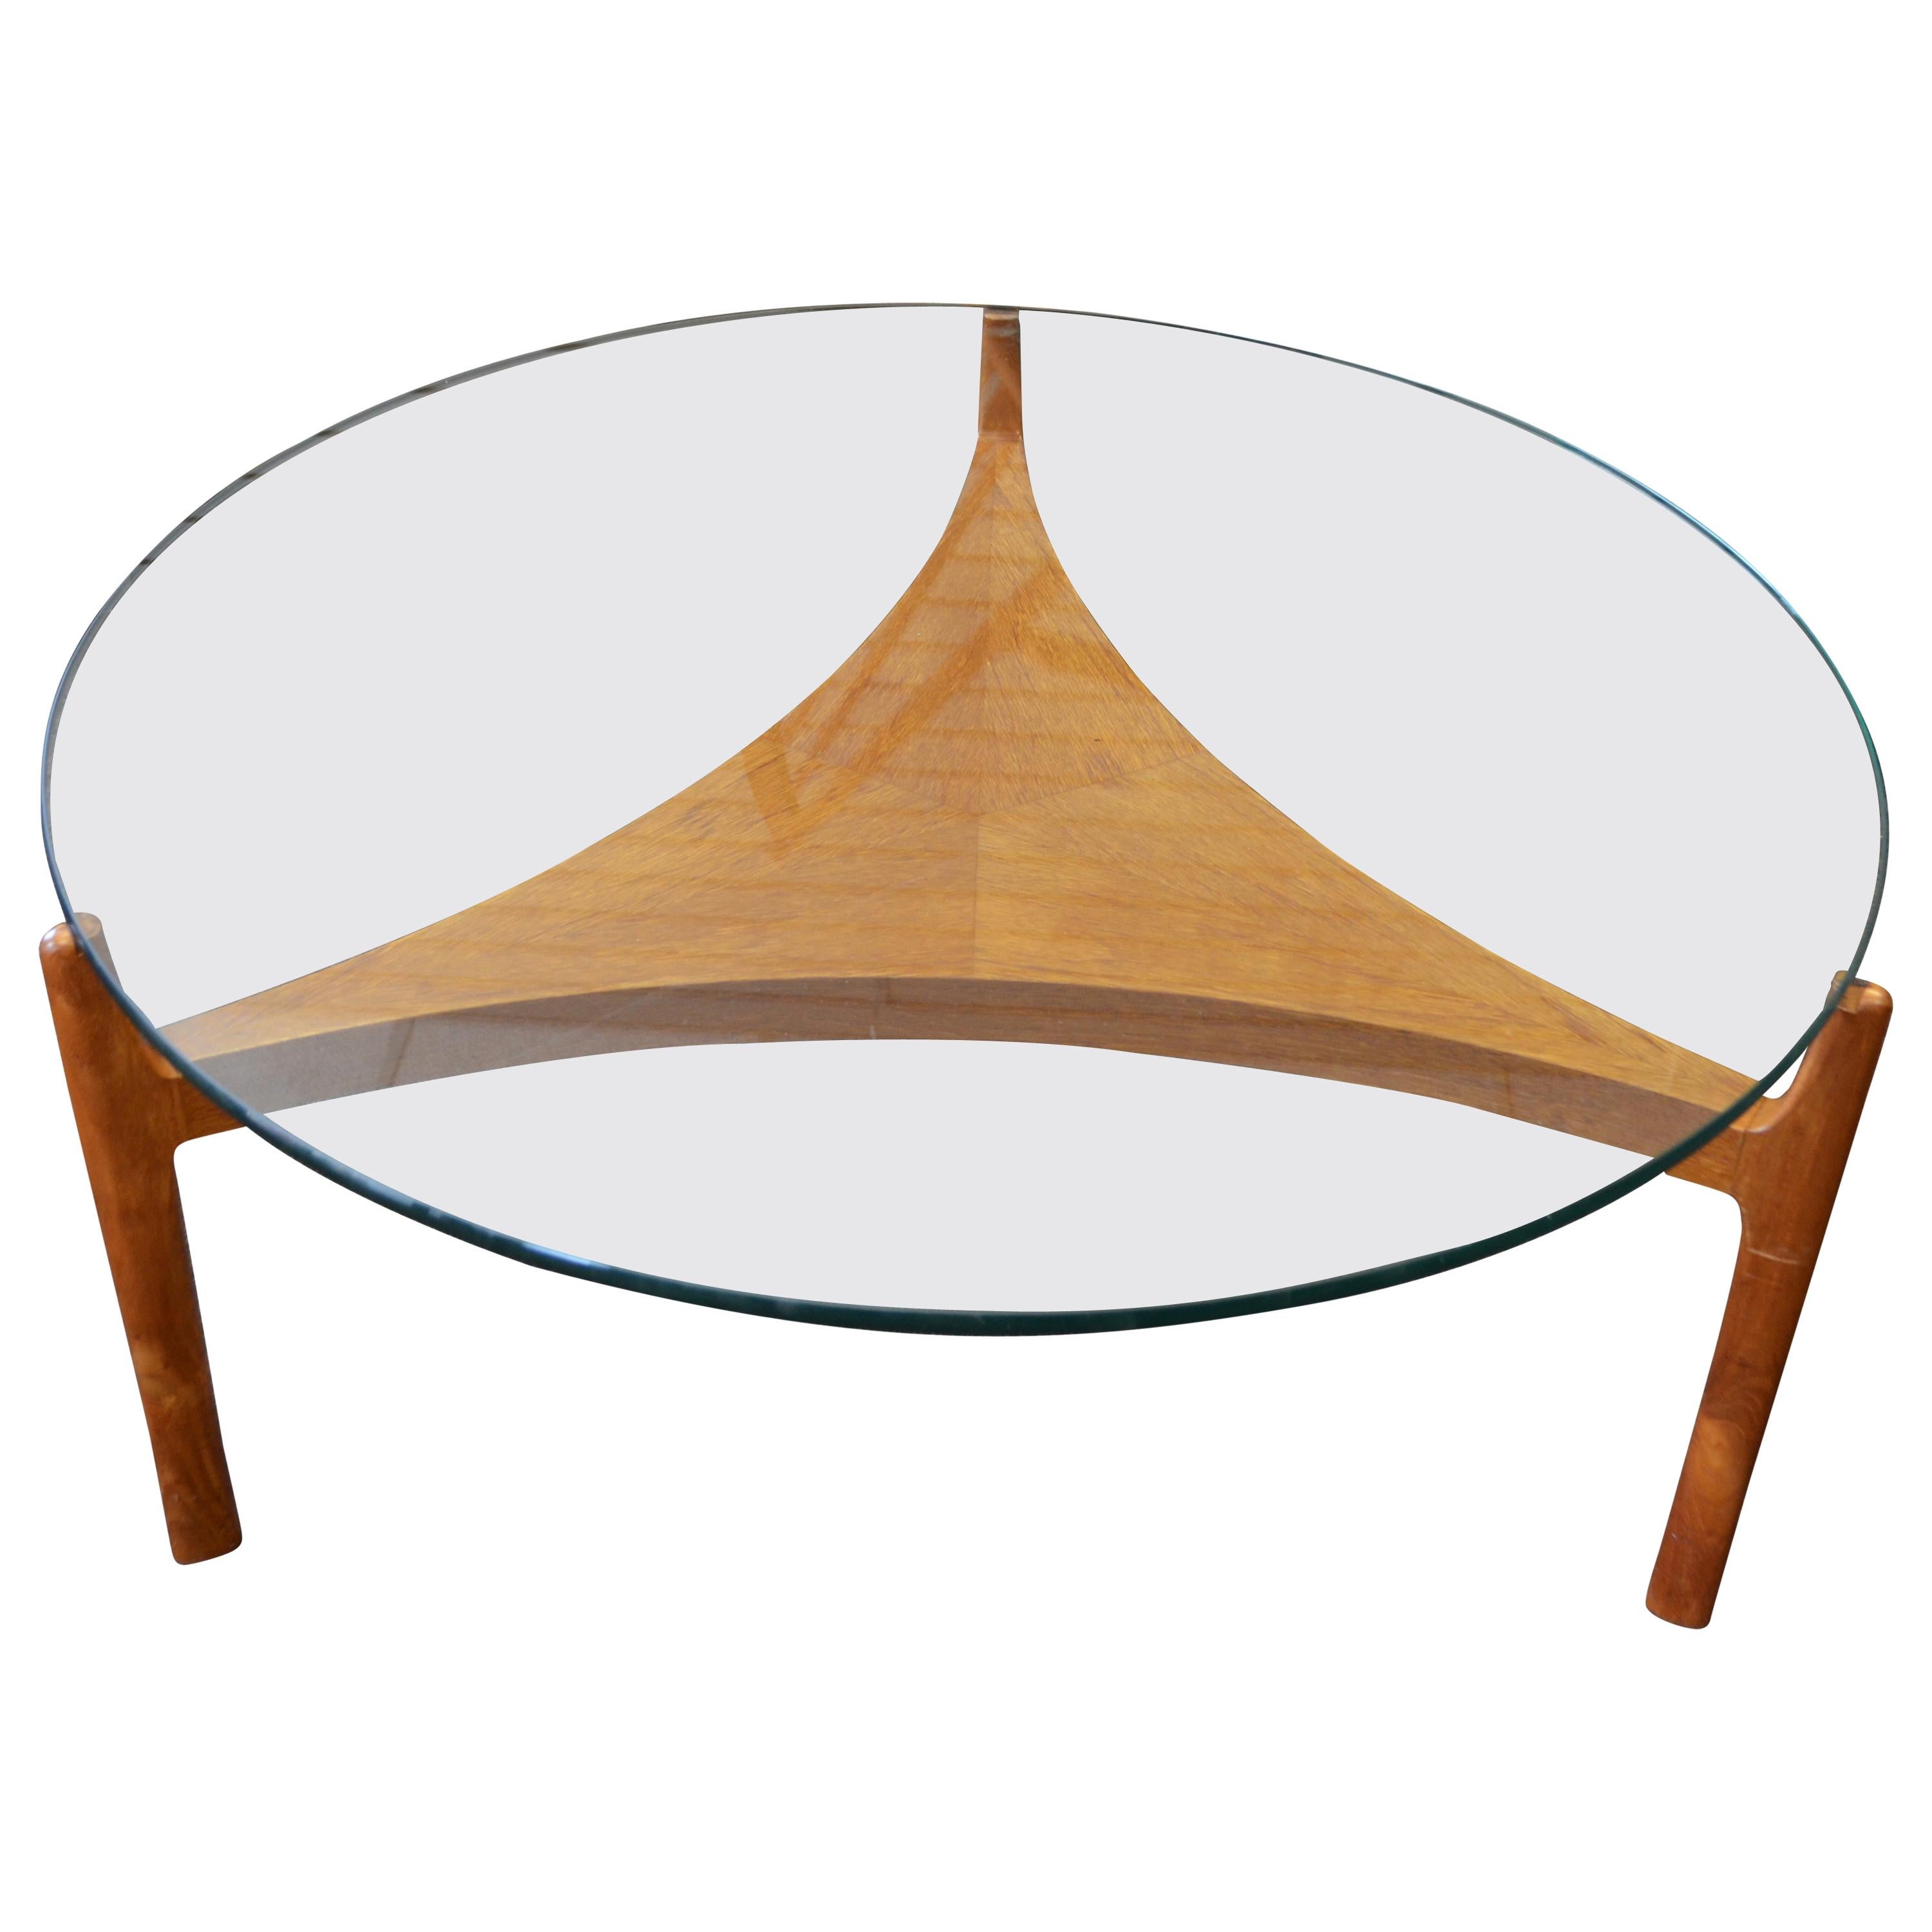 Midcentury Coffee Table with Teak Base and Glass Top Designed by Sven Ellekaer For Sale